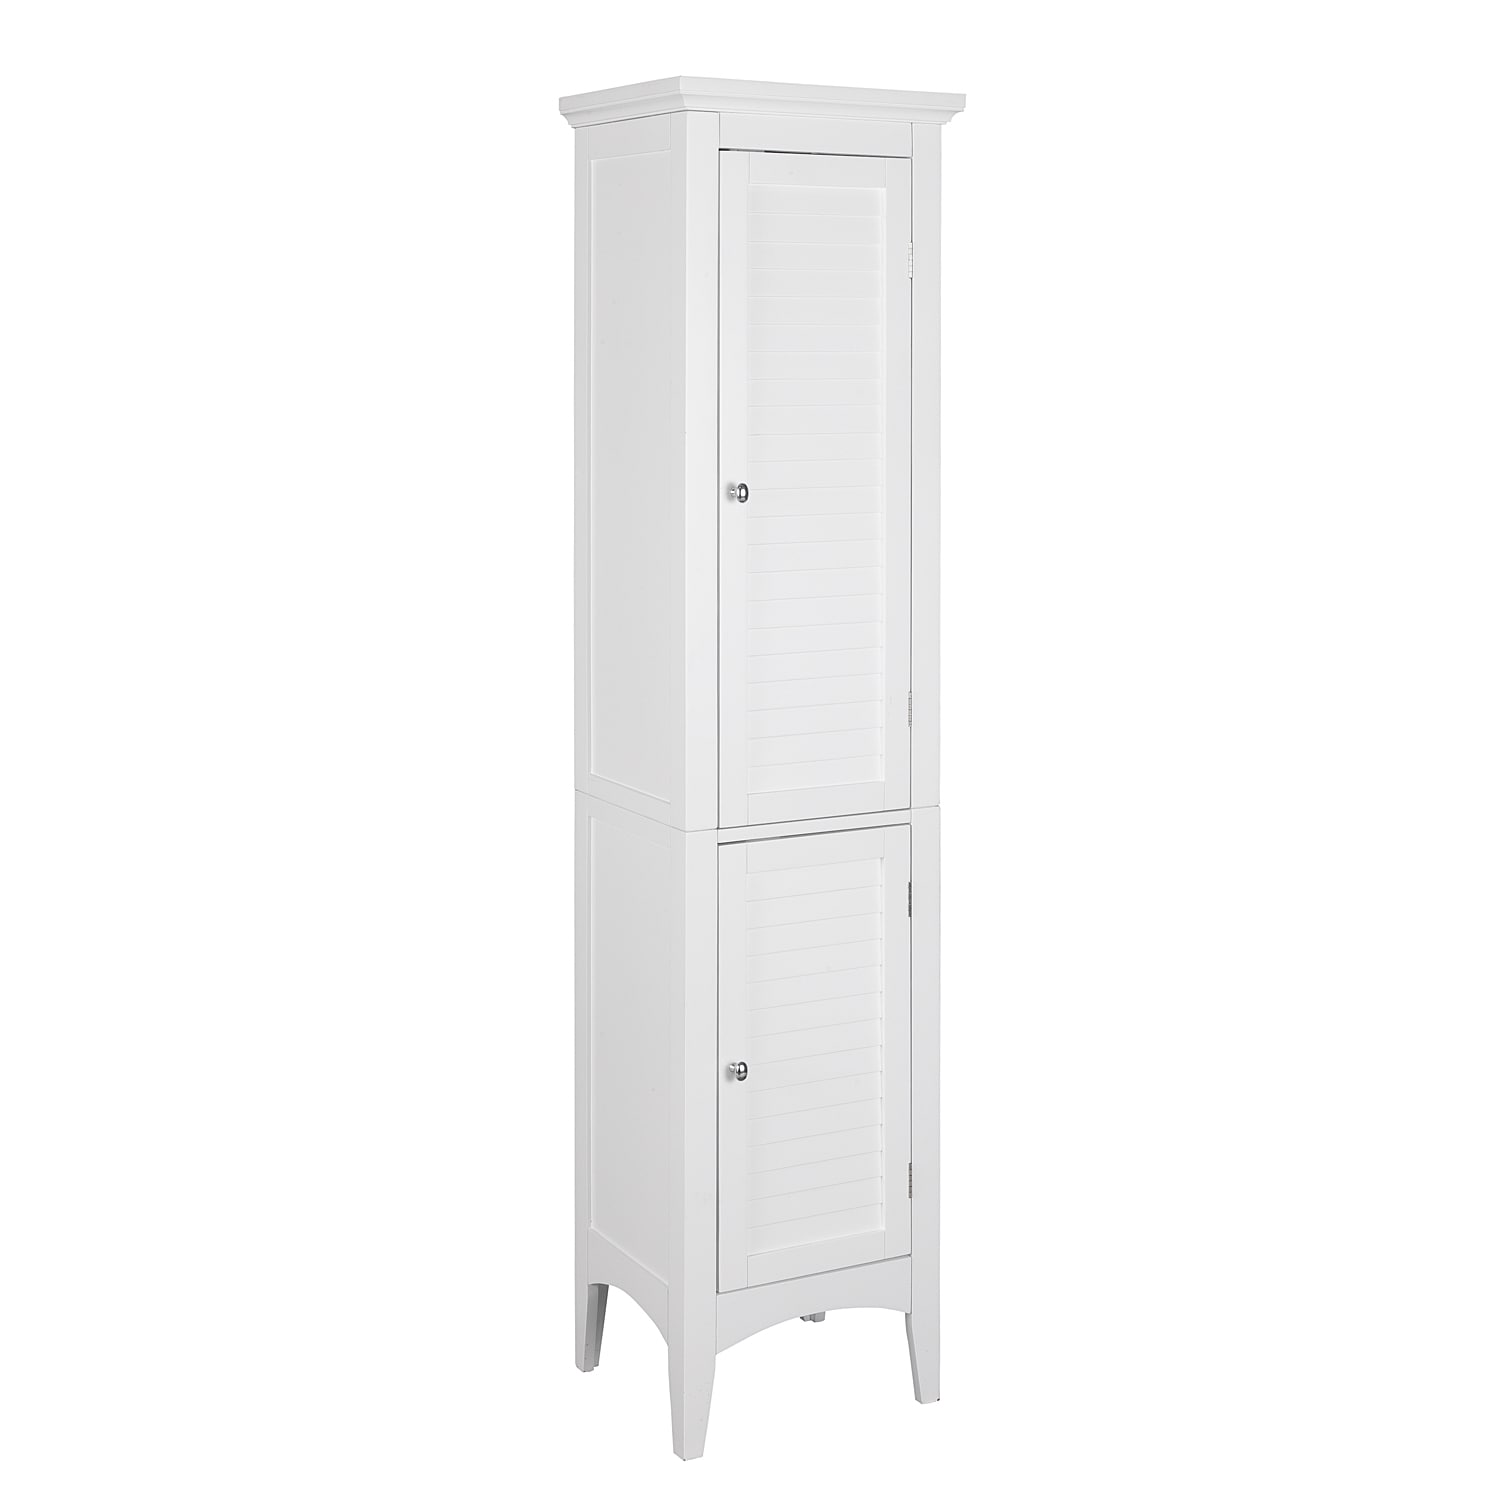 Tower Tall Under Cabinet Storage Shelves - Set of 2